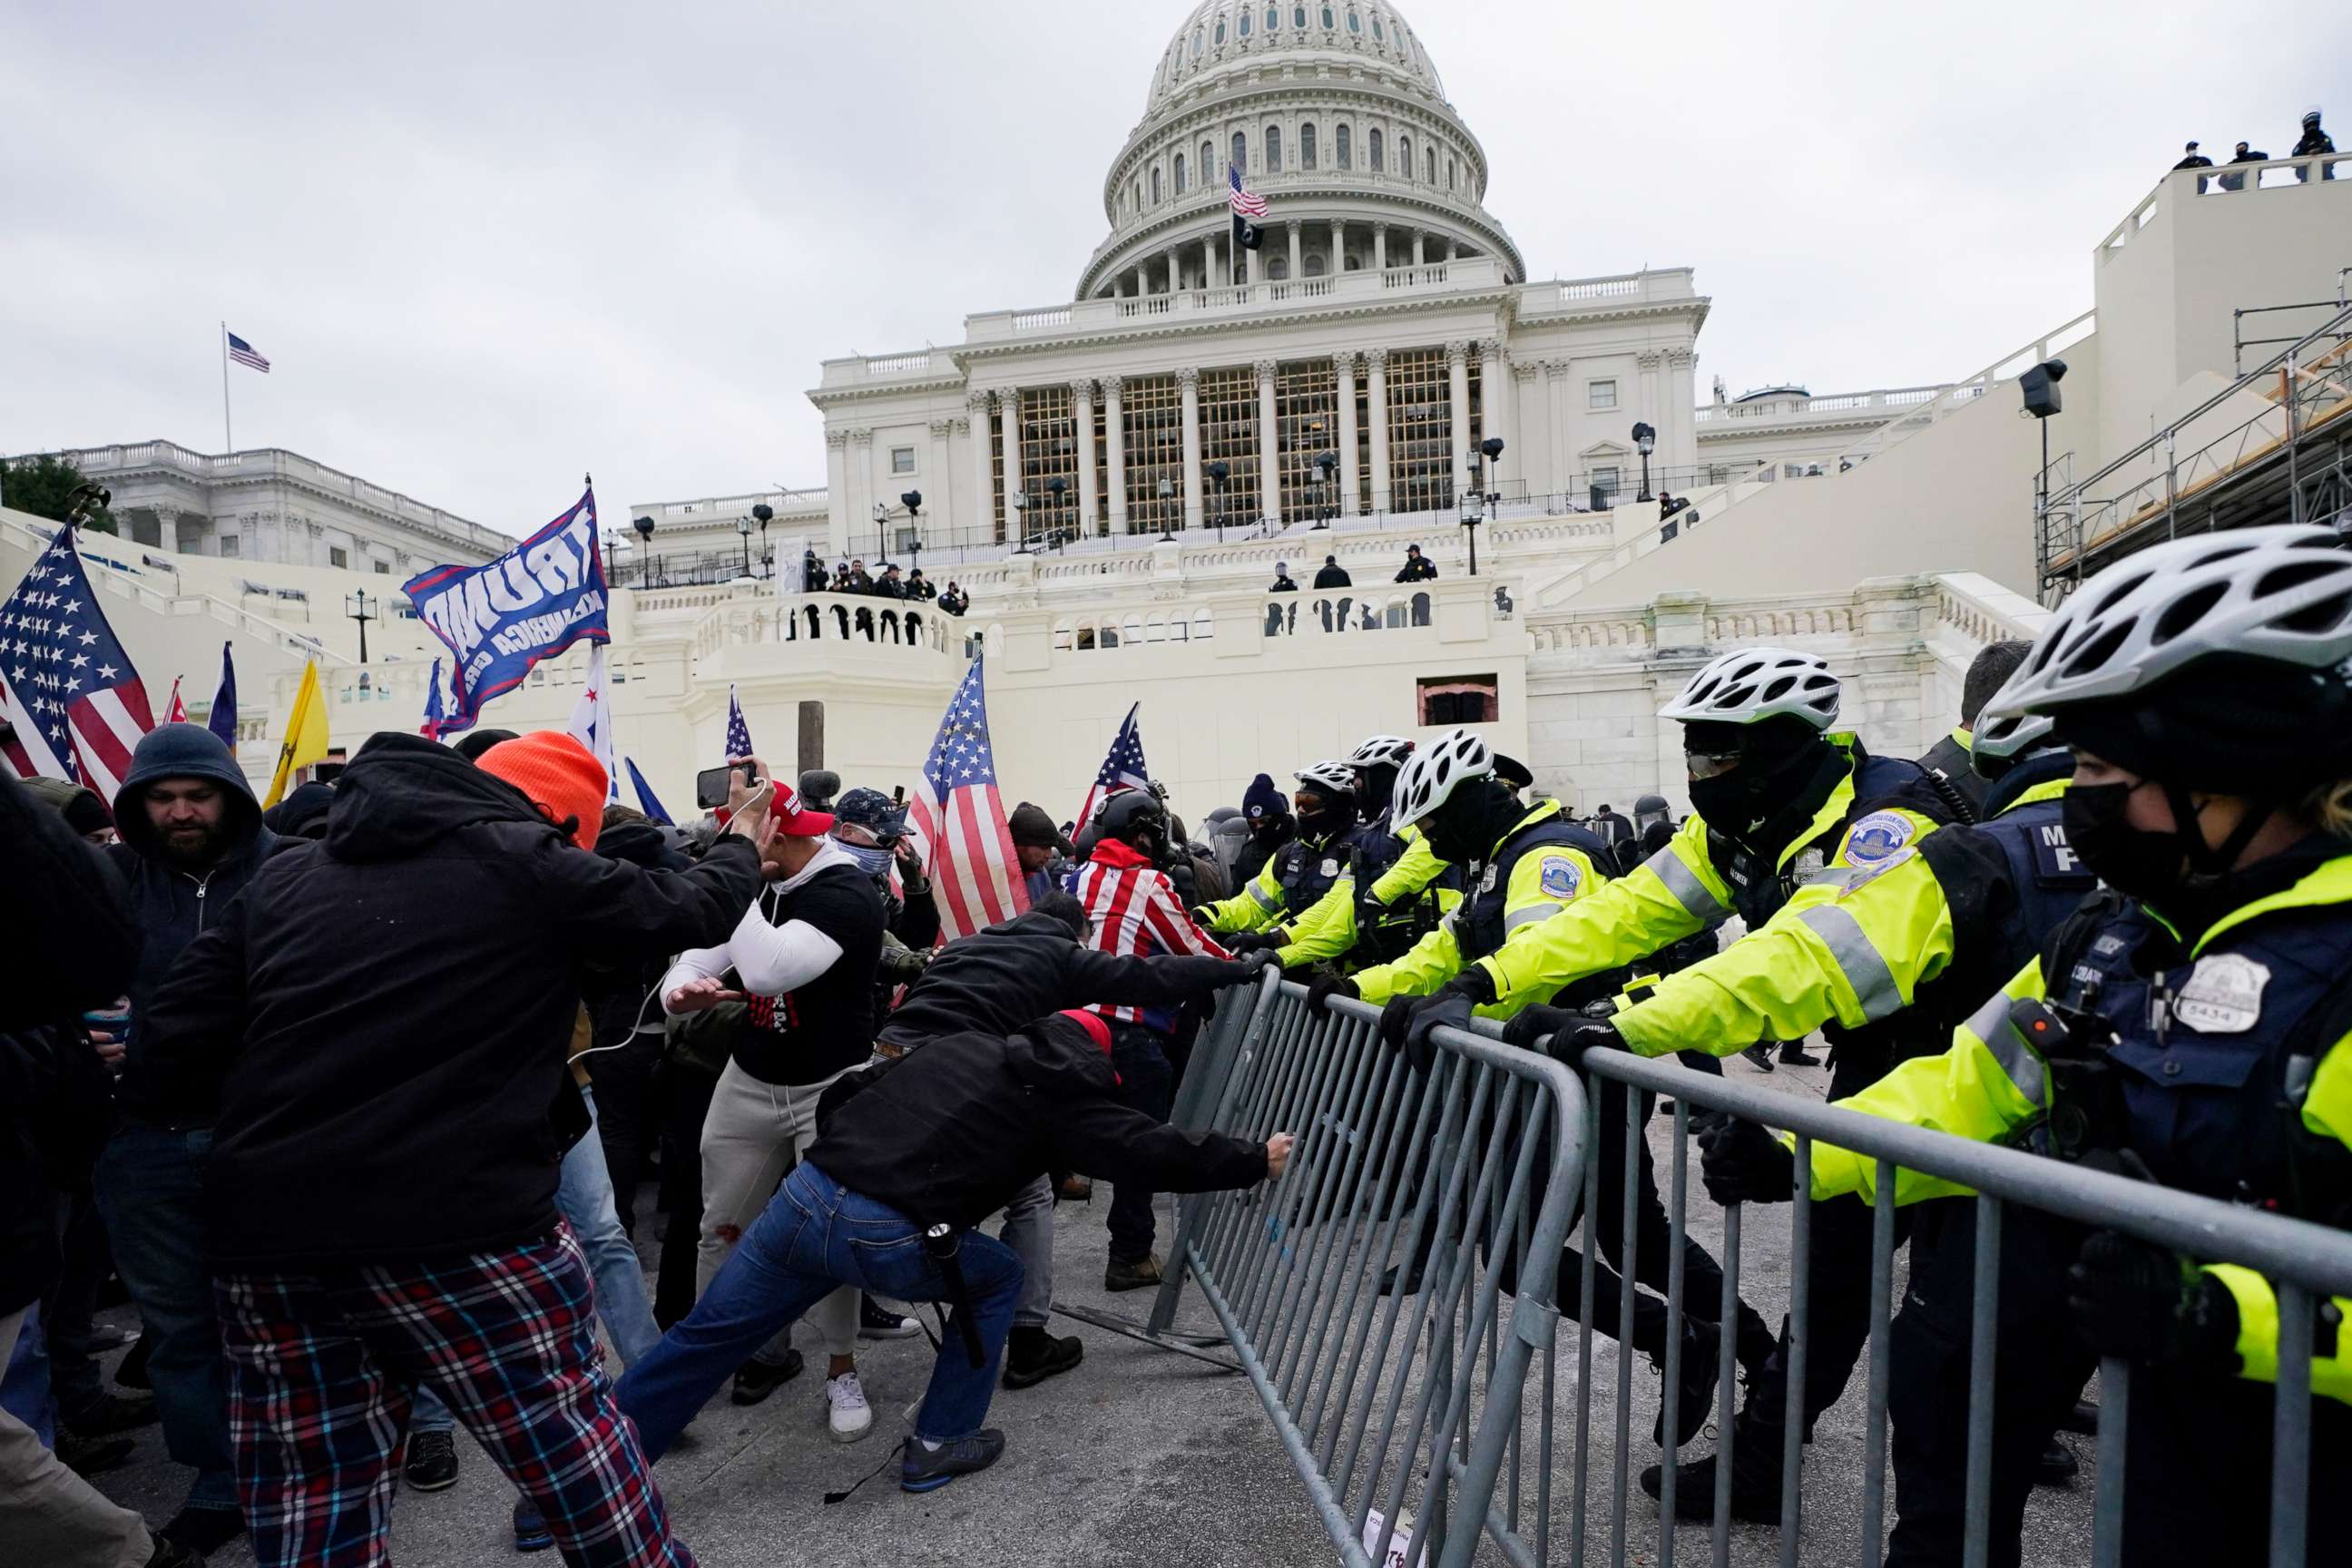 PHOTO: Supporters of U.S. President Donald Trump try to break through a police barrier at the U.S. Capitol in Washington, D.C., on Jan. 6, 2021.